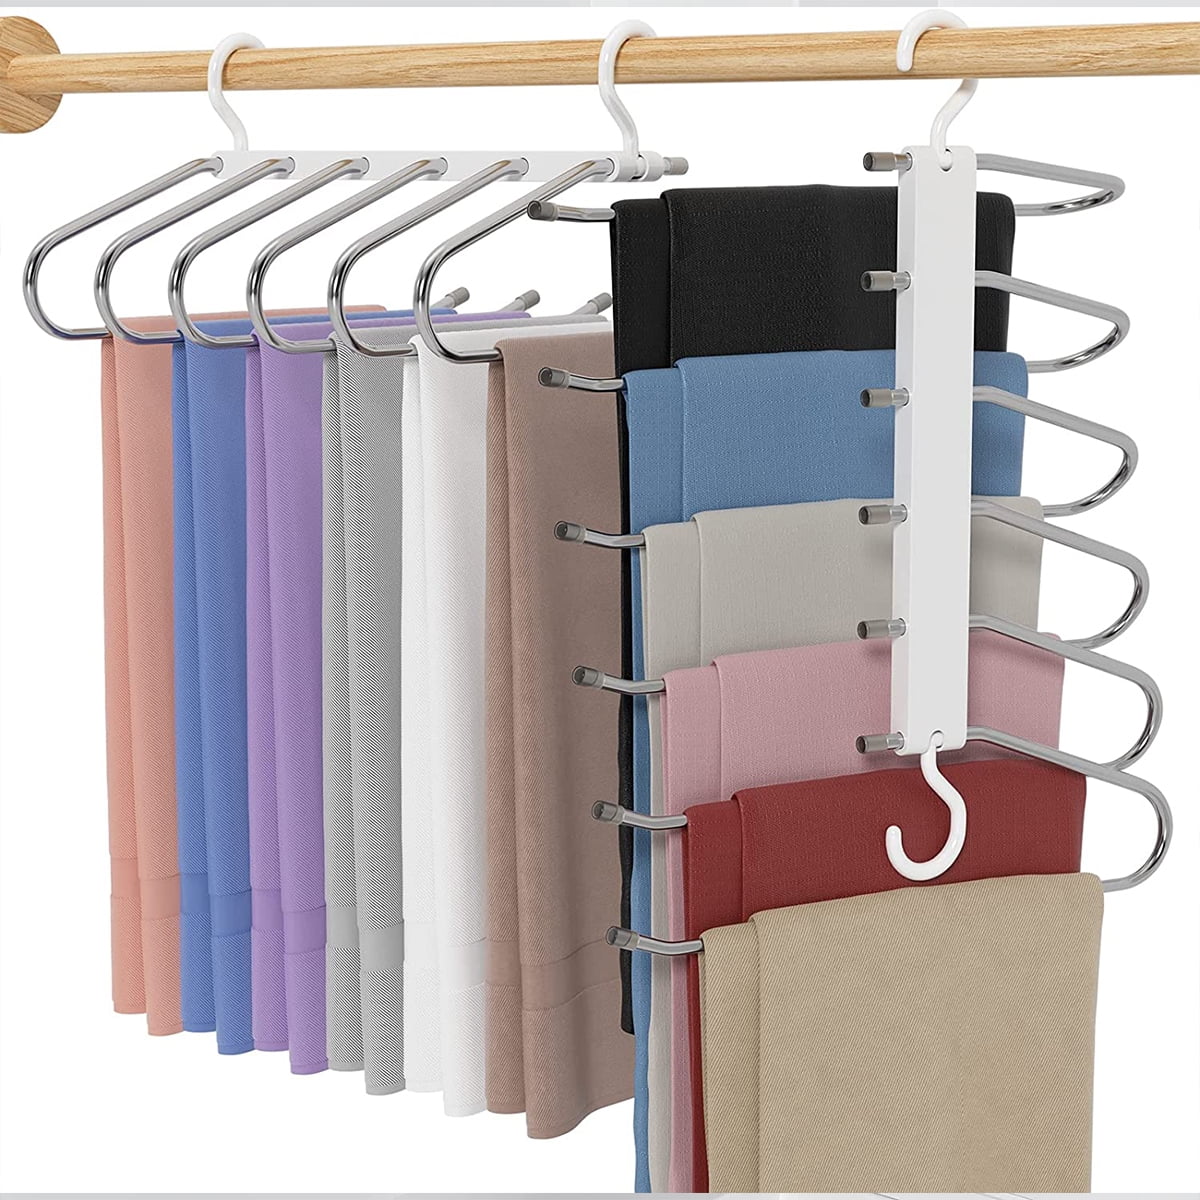 Closet Spice - 2 Pack - Strong, Durable Anti-Rust Chrome 5 Tier Pant Hangers,  Non Slip Foam Padded, Space Saving, Swing Design - Bed Bath & Beyond -  14682873